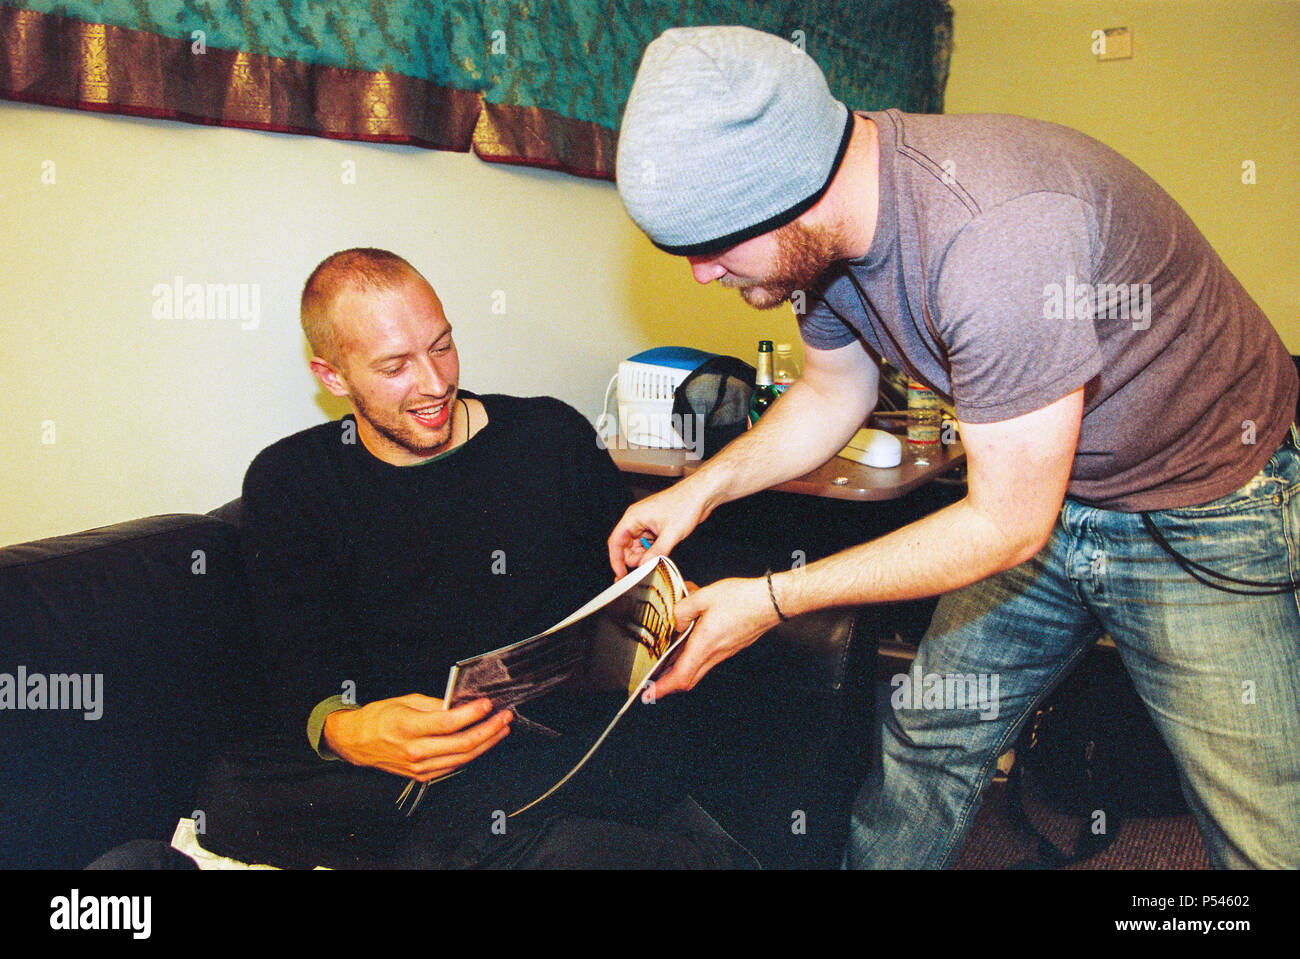 Will Champion: Just Right For Coldplay